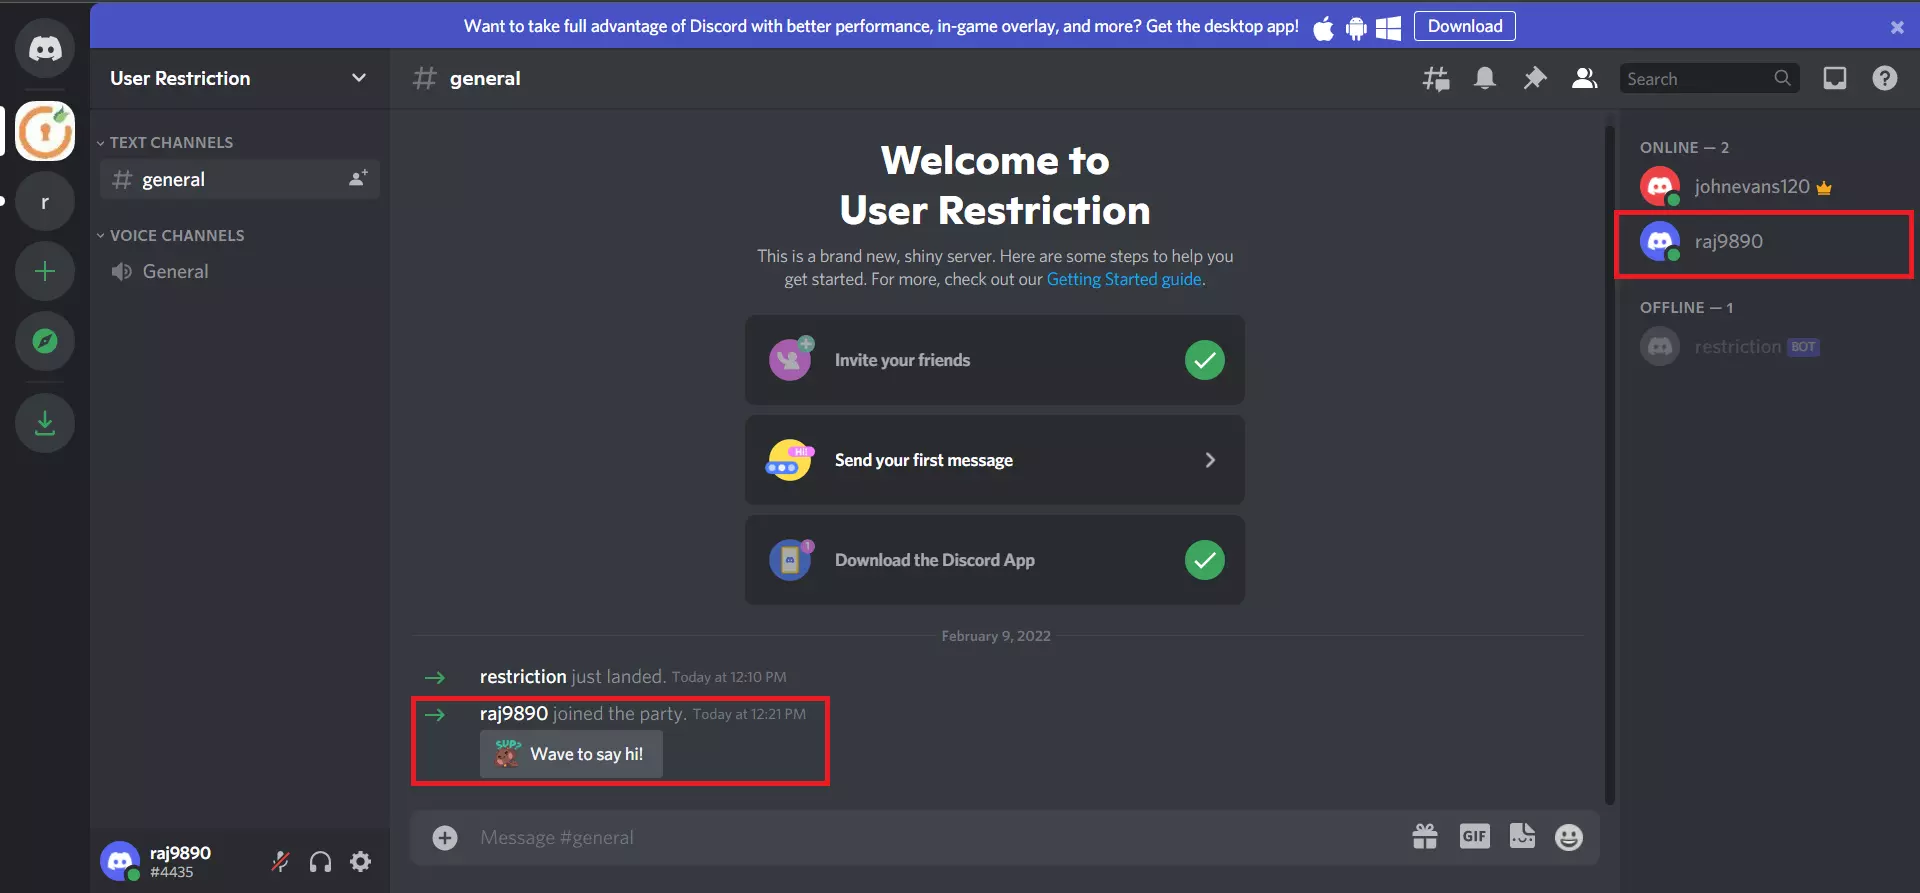 user allowed to access website if present in Discord channel